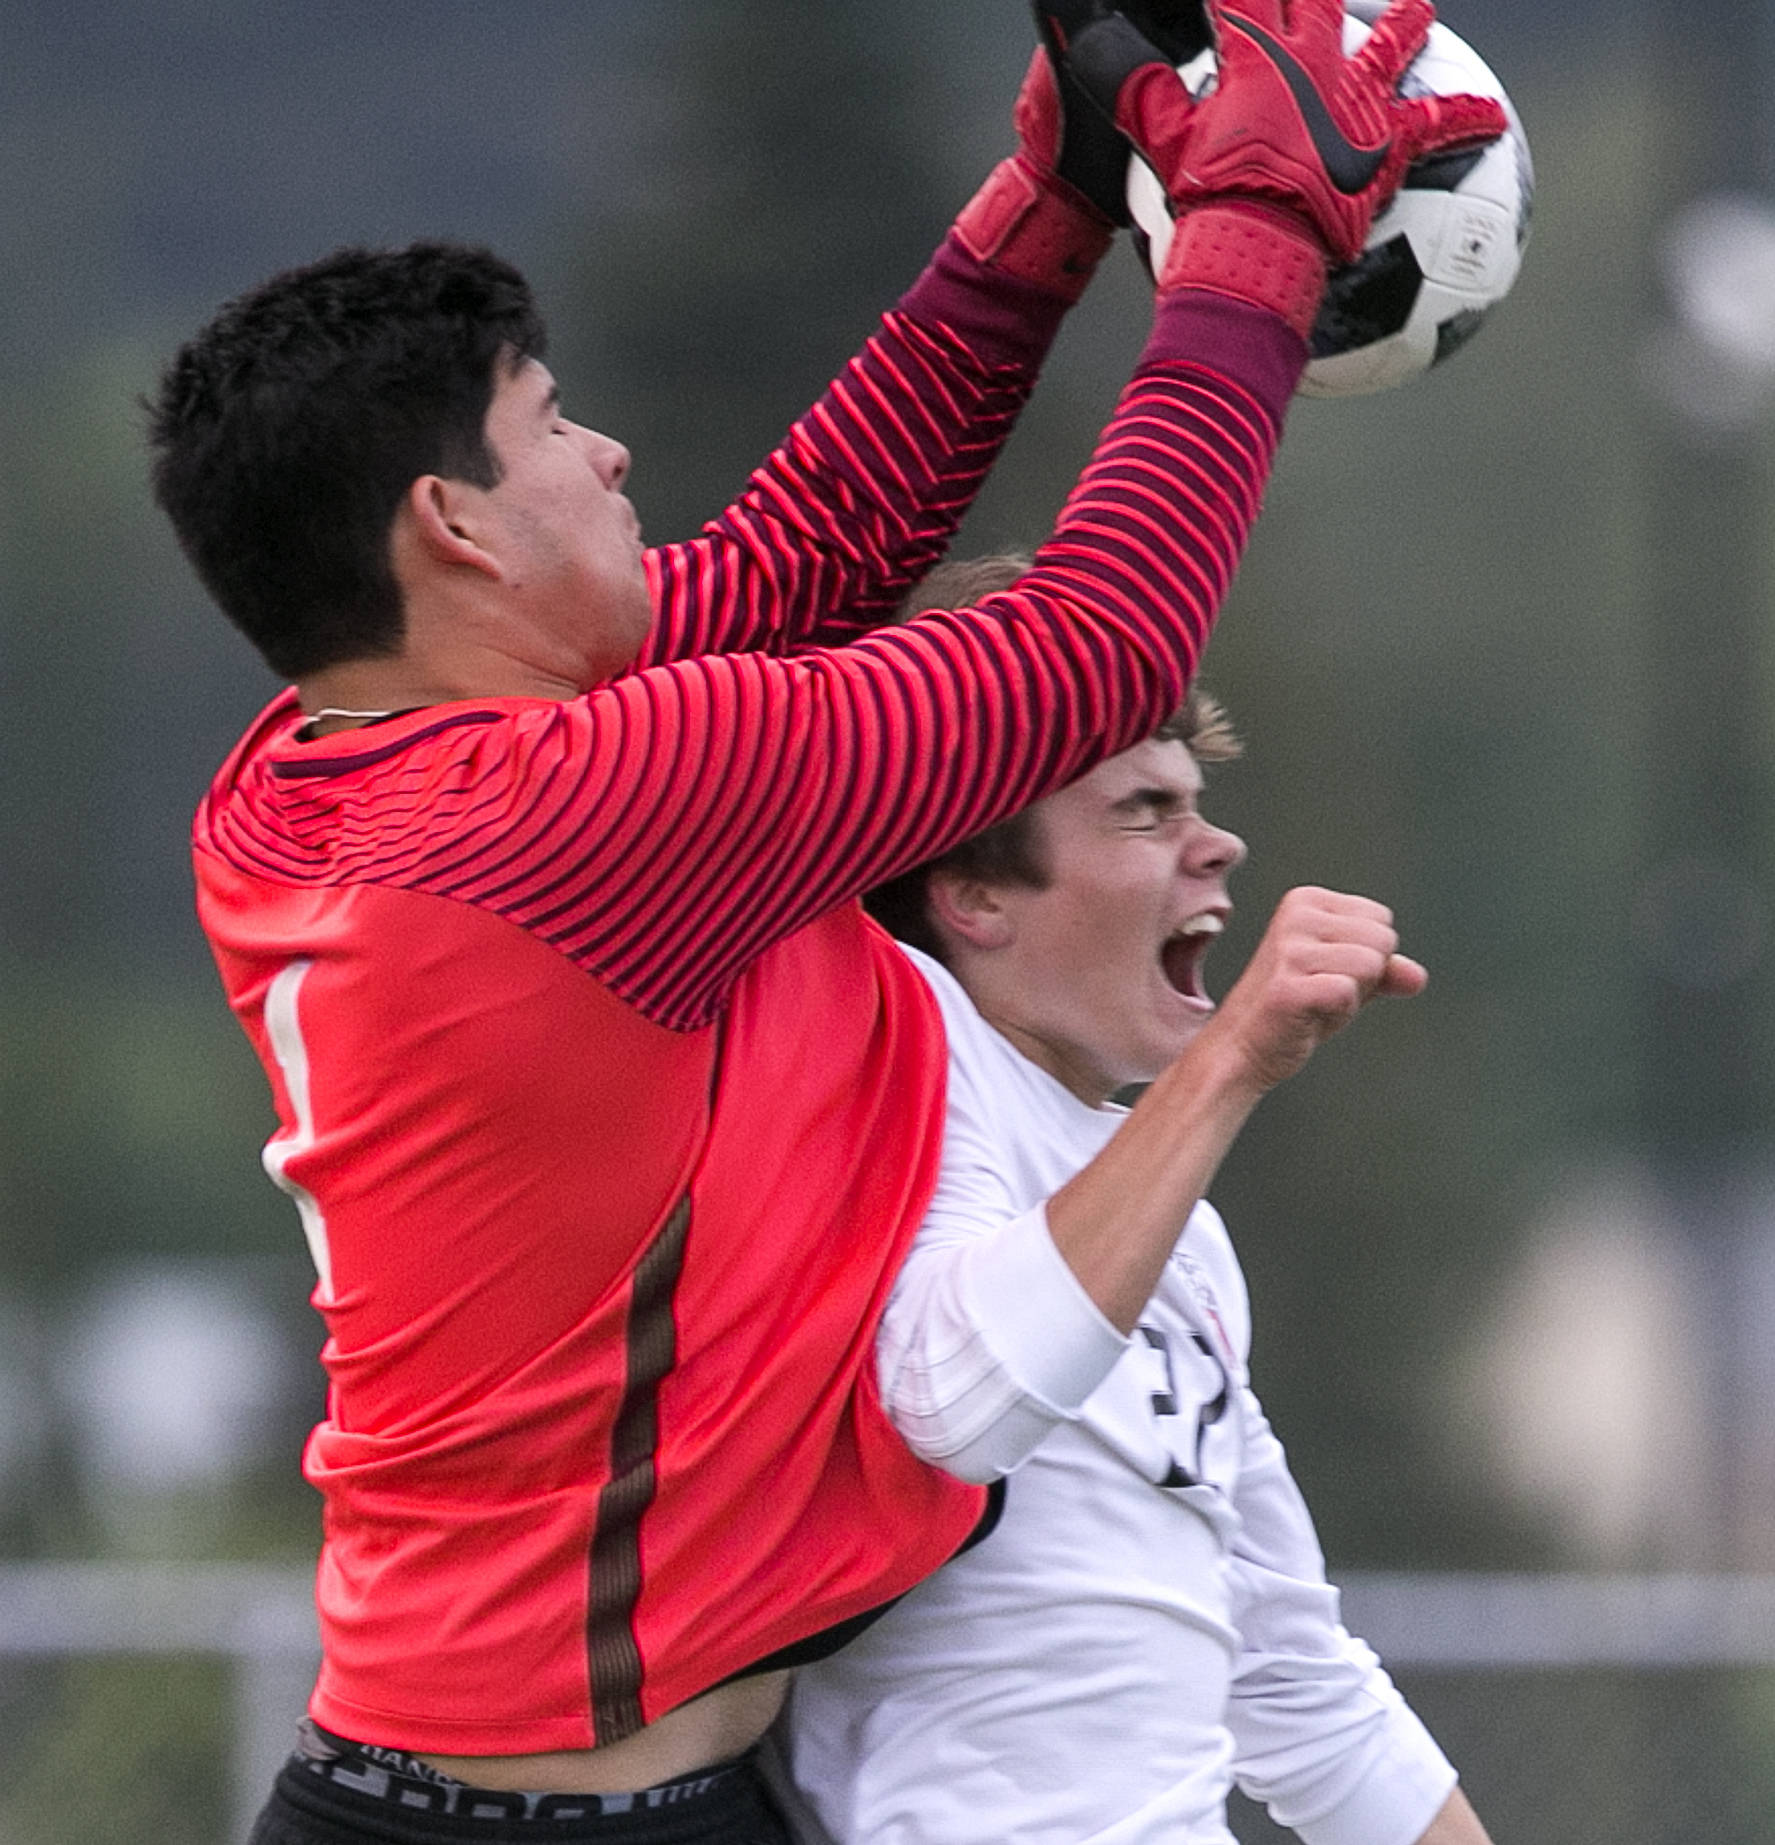 Redmond’s Ricardo Escalante makes a save over Snohomish’s Eli Esterly in the quarterfinals Friday night at Veterans Memorial Stadiums in Snohomish on May 18. (Kevin Clark / The Herald)